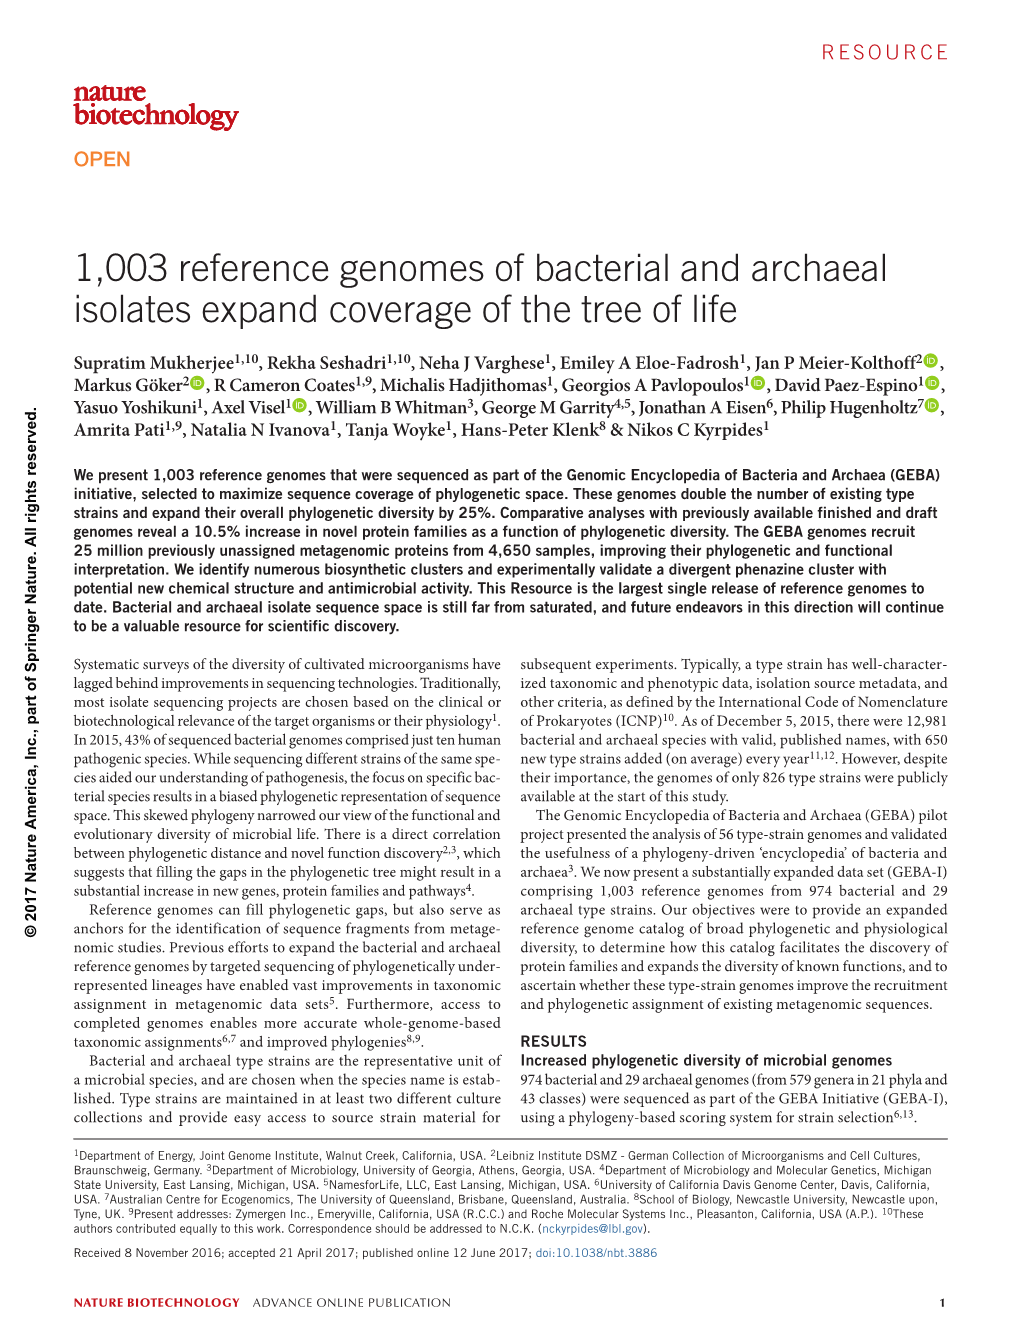 1,003 Reference Genomes of Bacterial and Archaeal Isolates Expand